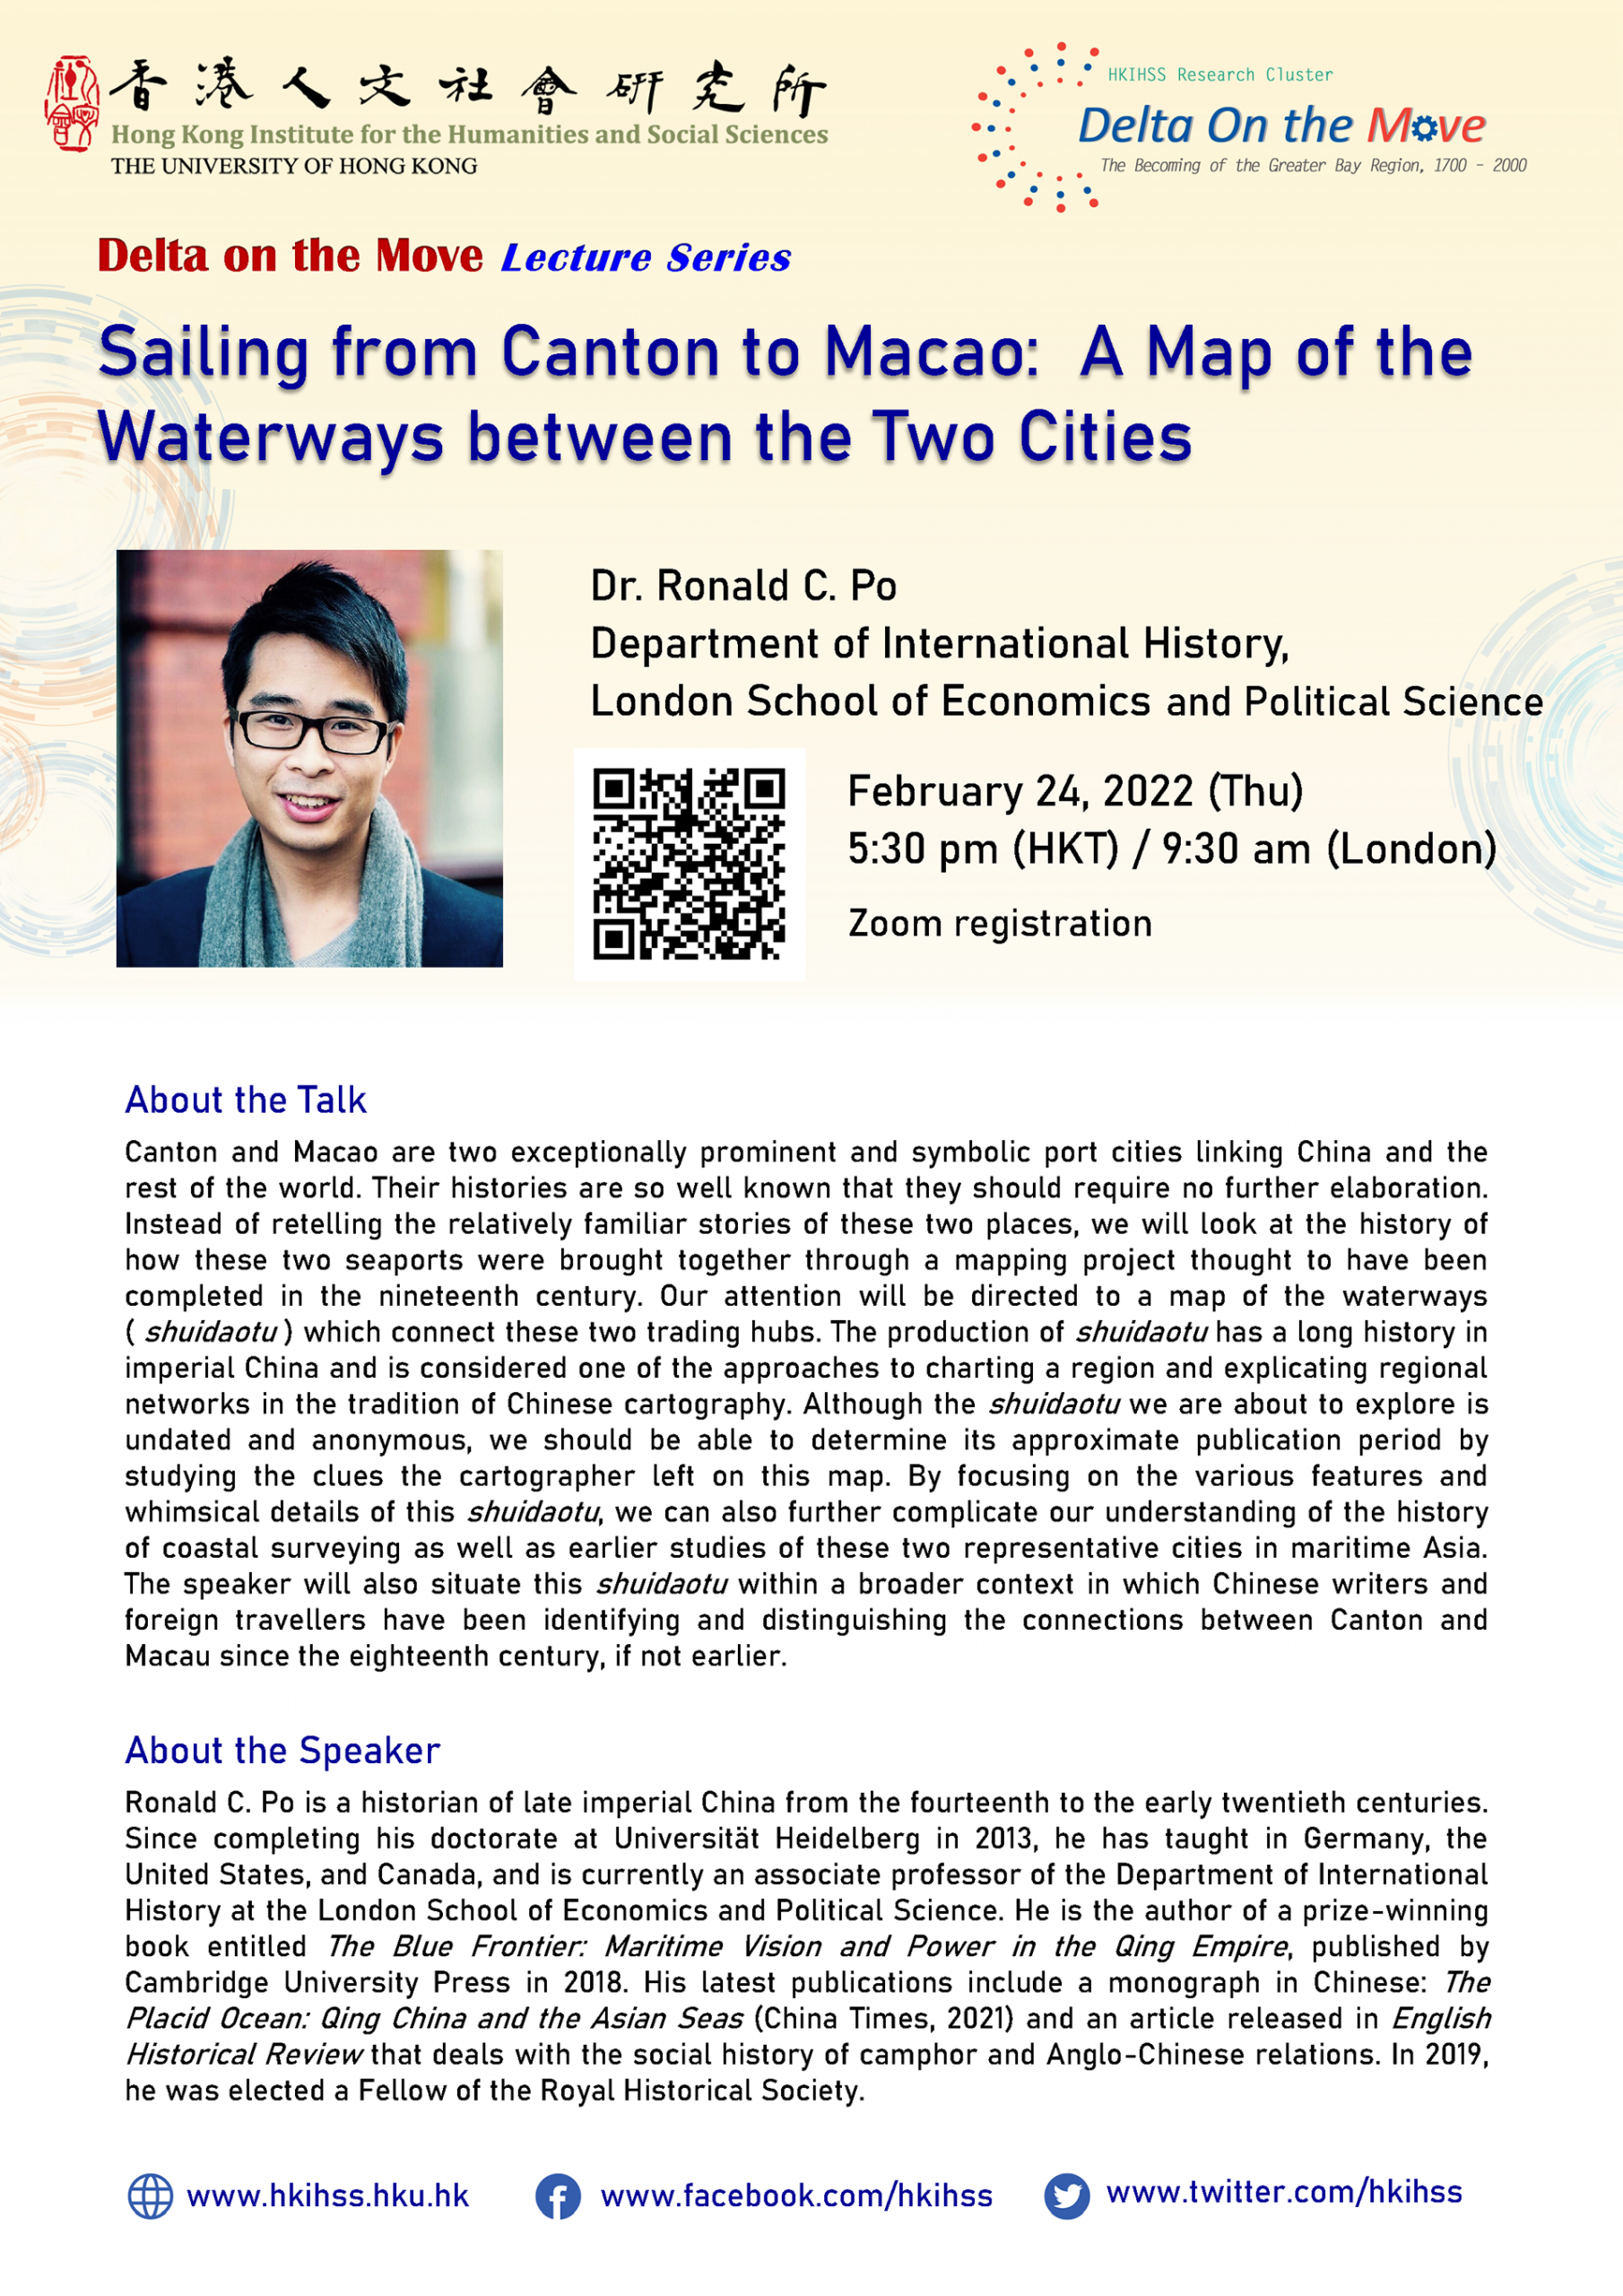 Delta on the Move Lecture Series “Sailing from Canton to Macao: A Map of the Waterways between the Two Cities